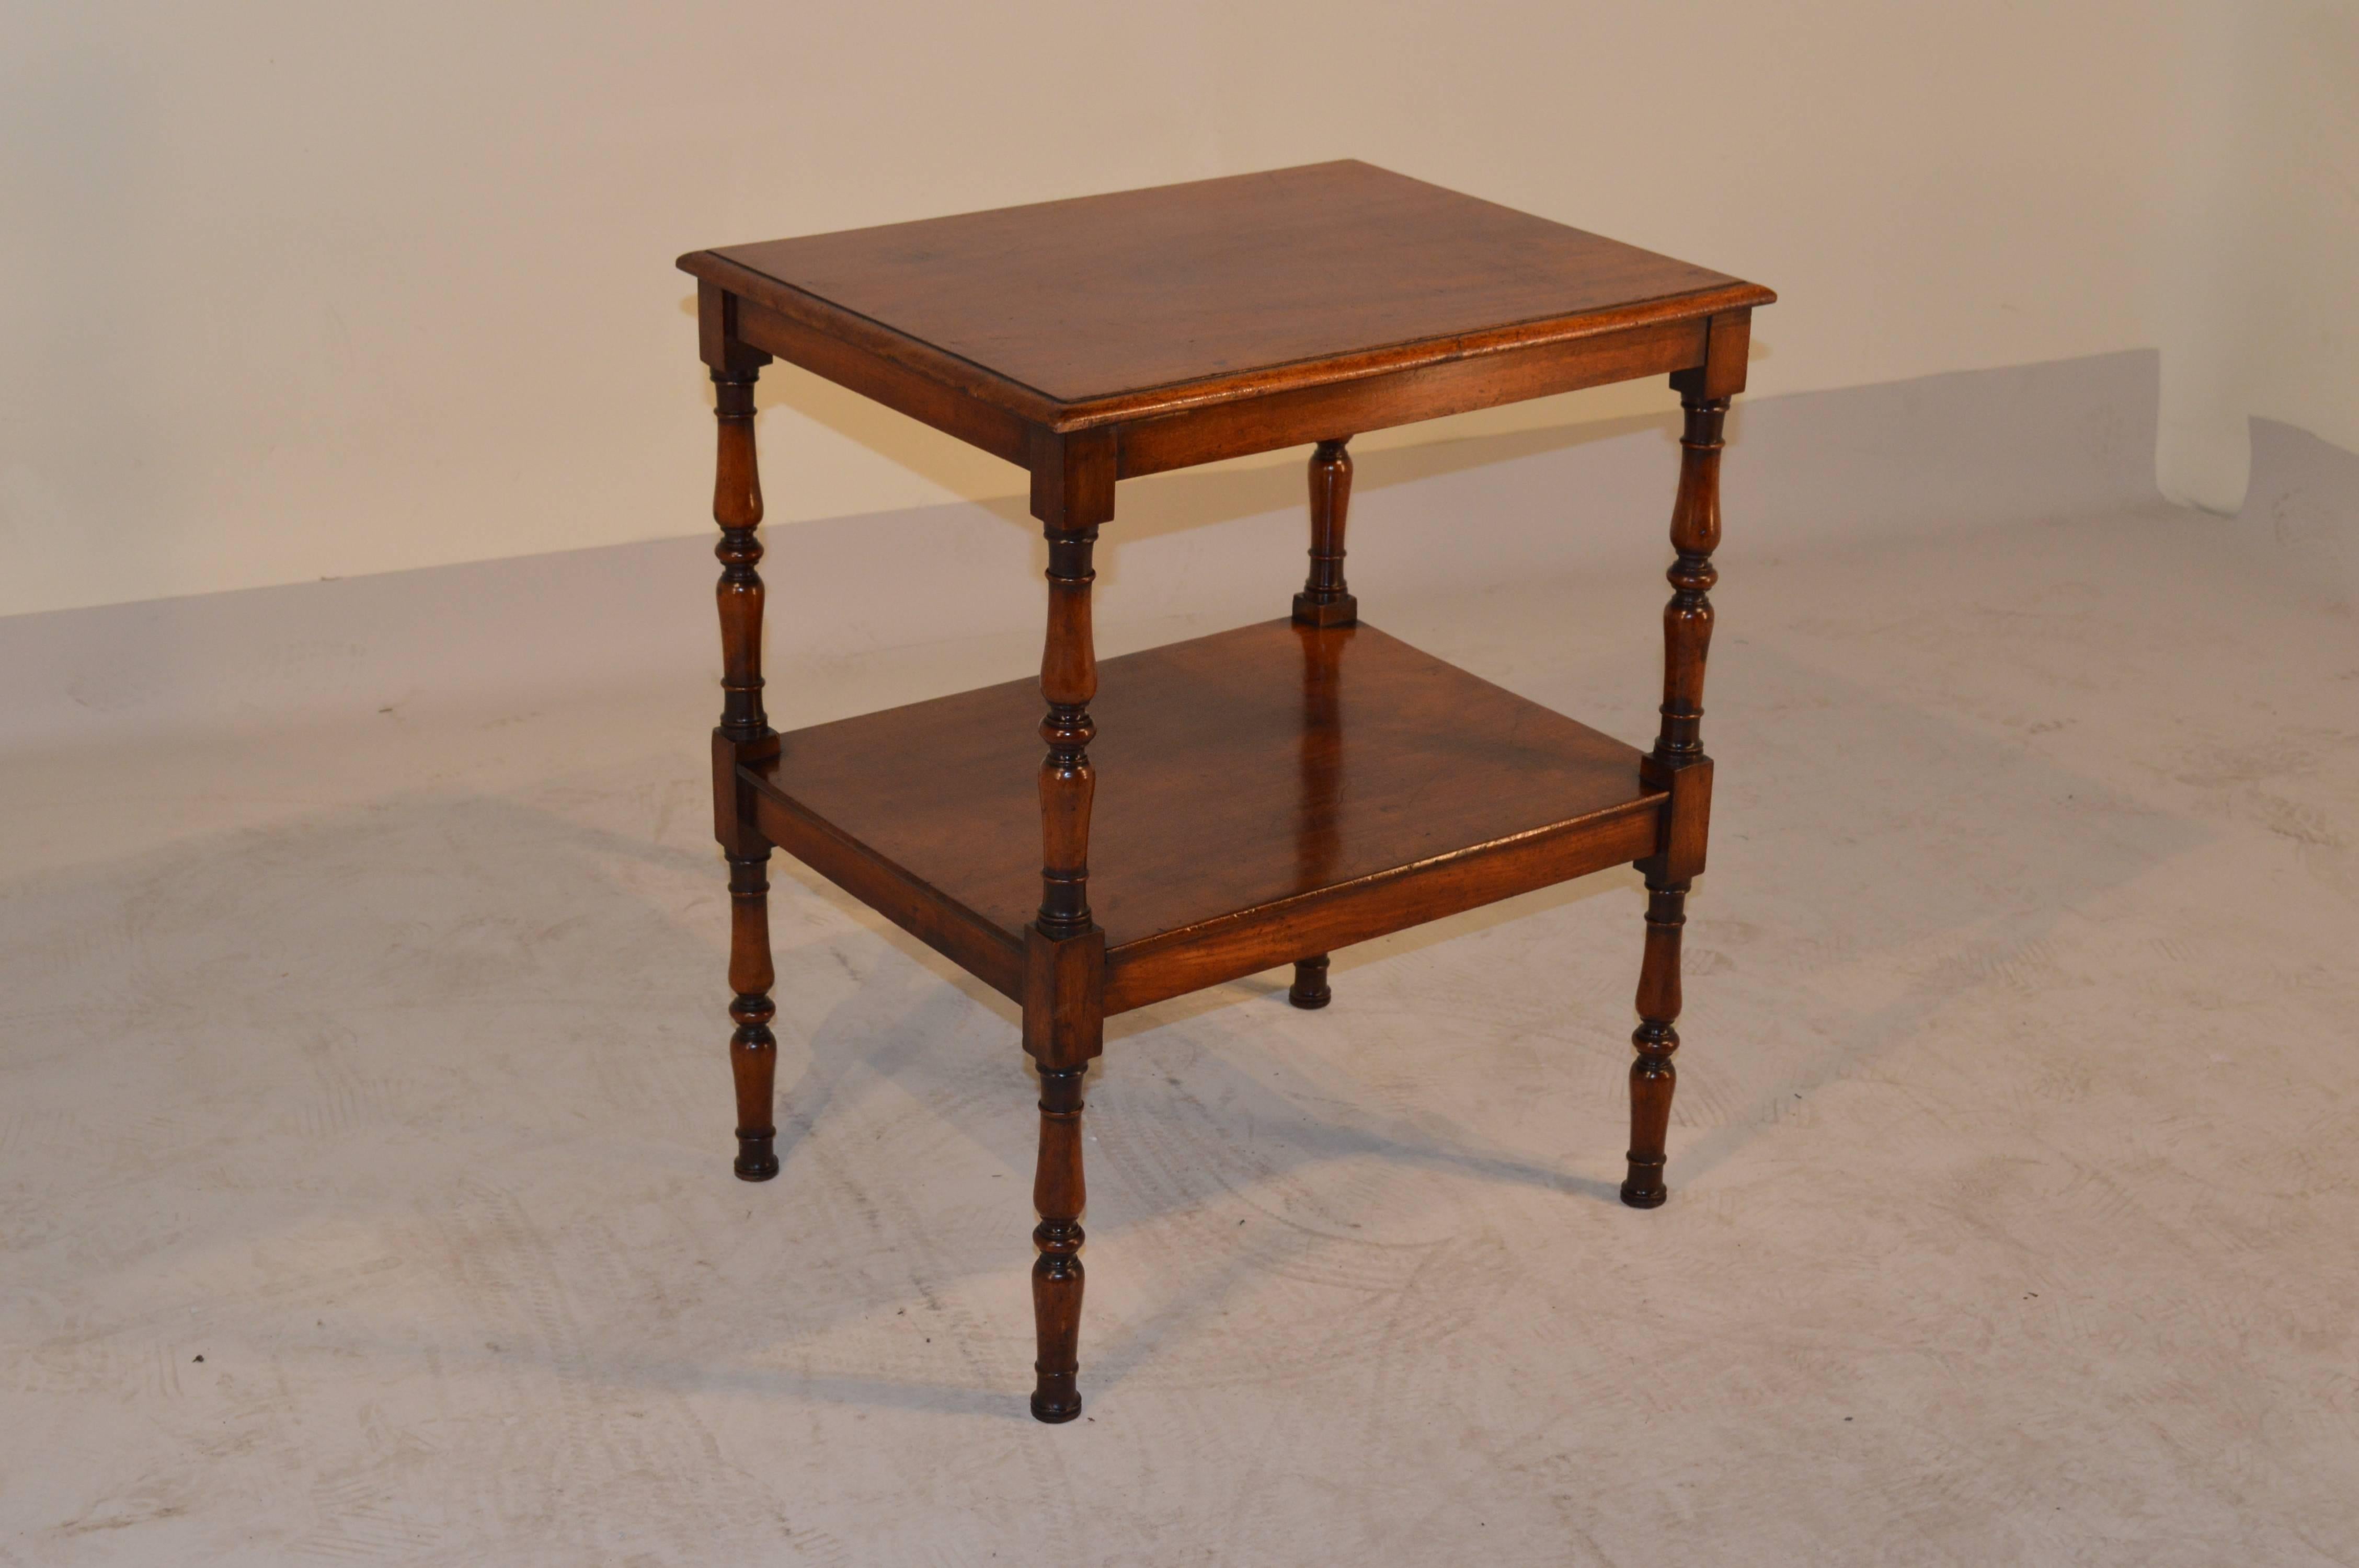 Late 19th-C. English side table made from Mahogany. The top has a beveled edge around the top and has a lower shelf and nicely turned legs.